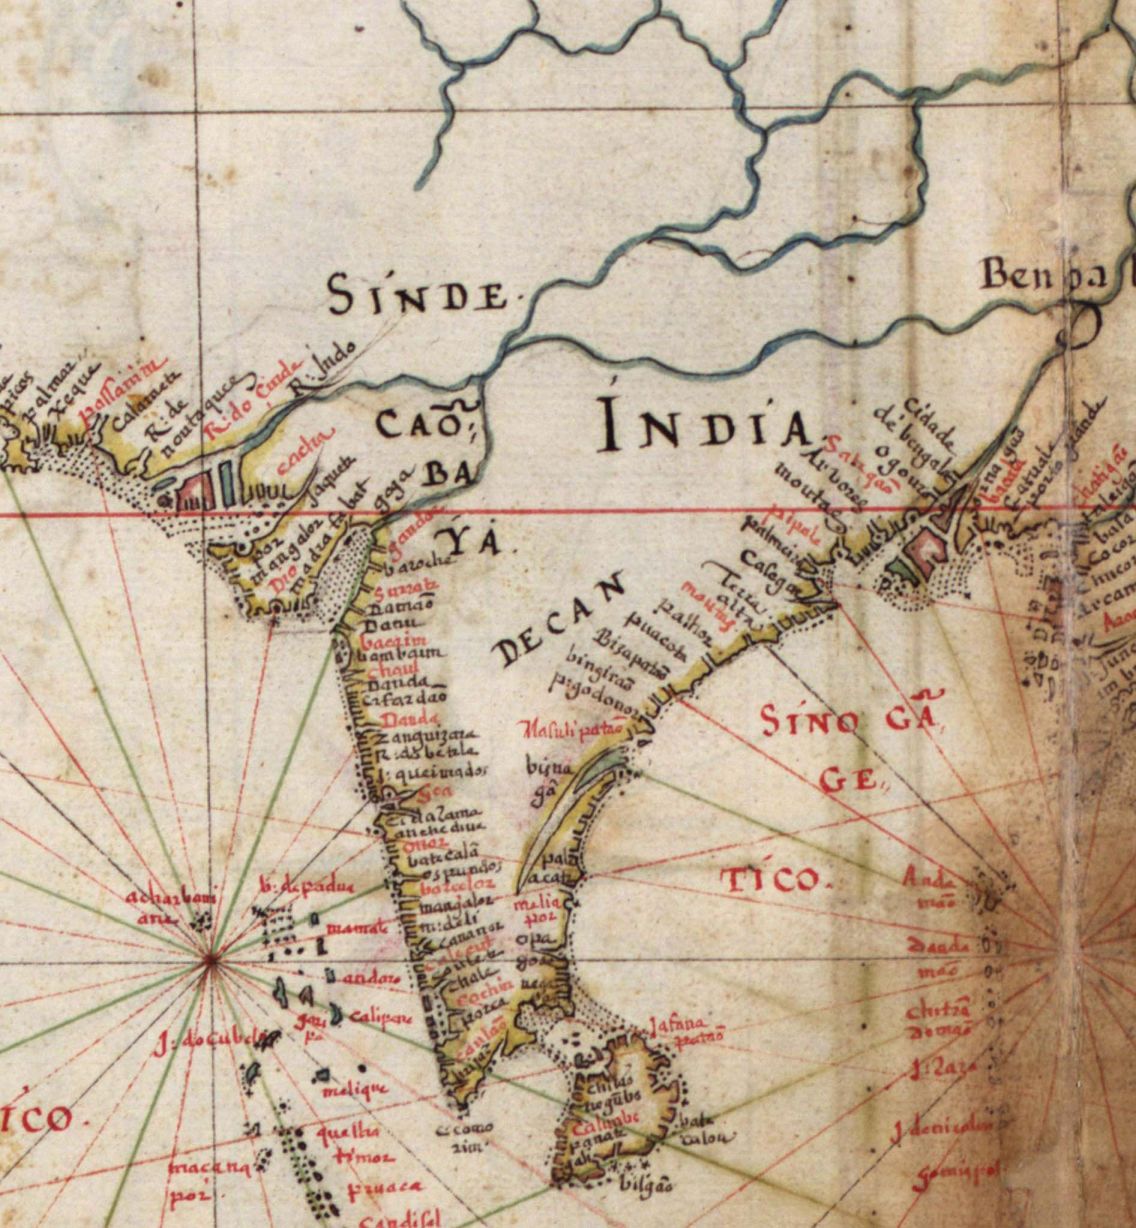 Portugues_map_of_India,_1630--reduced